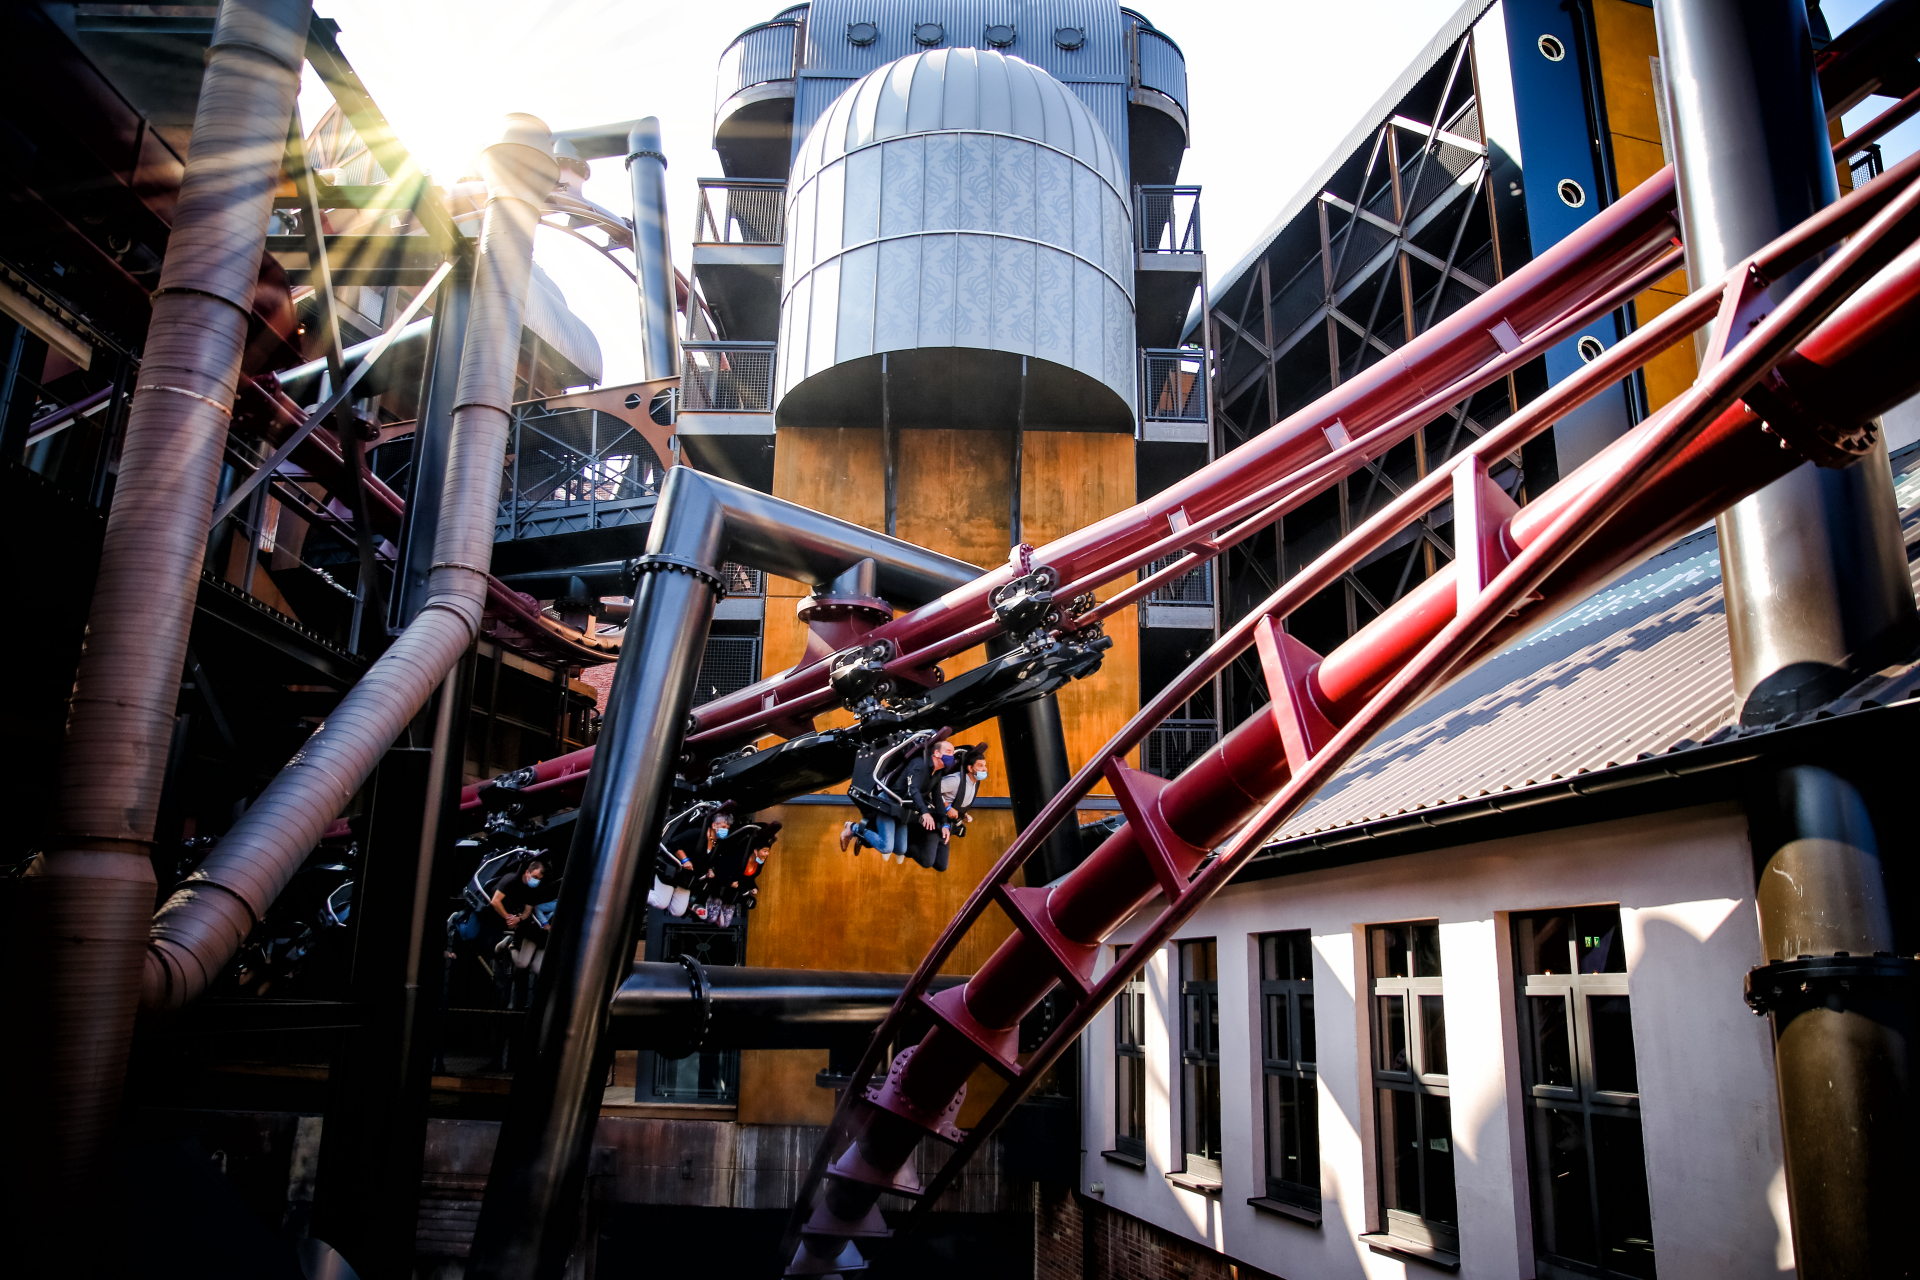 CONGRATULATIONS TO PHANTASIALAND WITH THE OPENING OF 'F.L.Y.'! | Vekoma